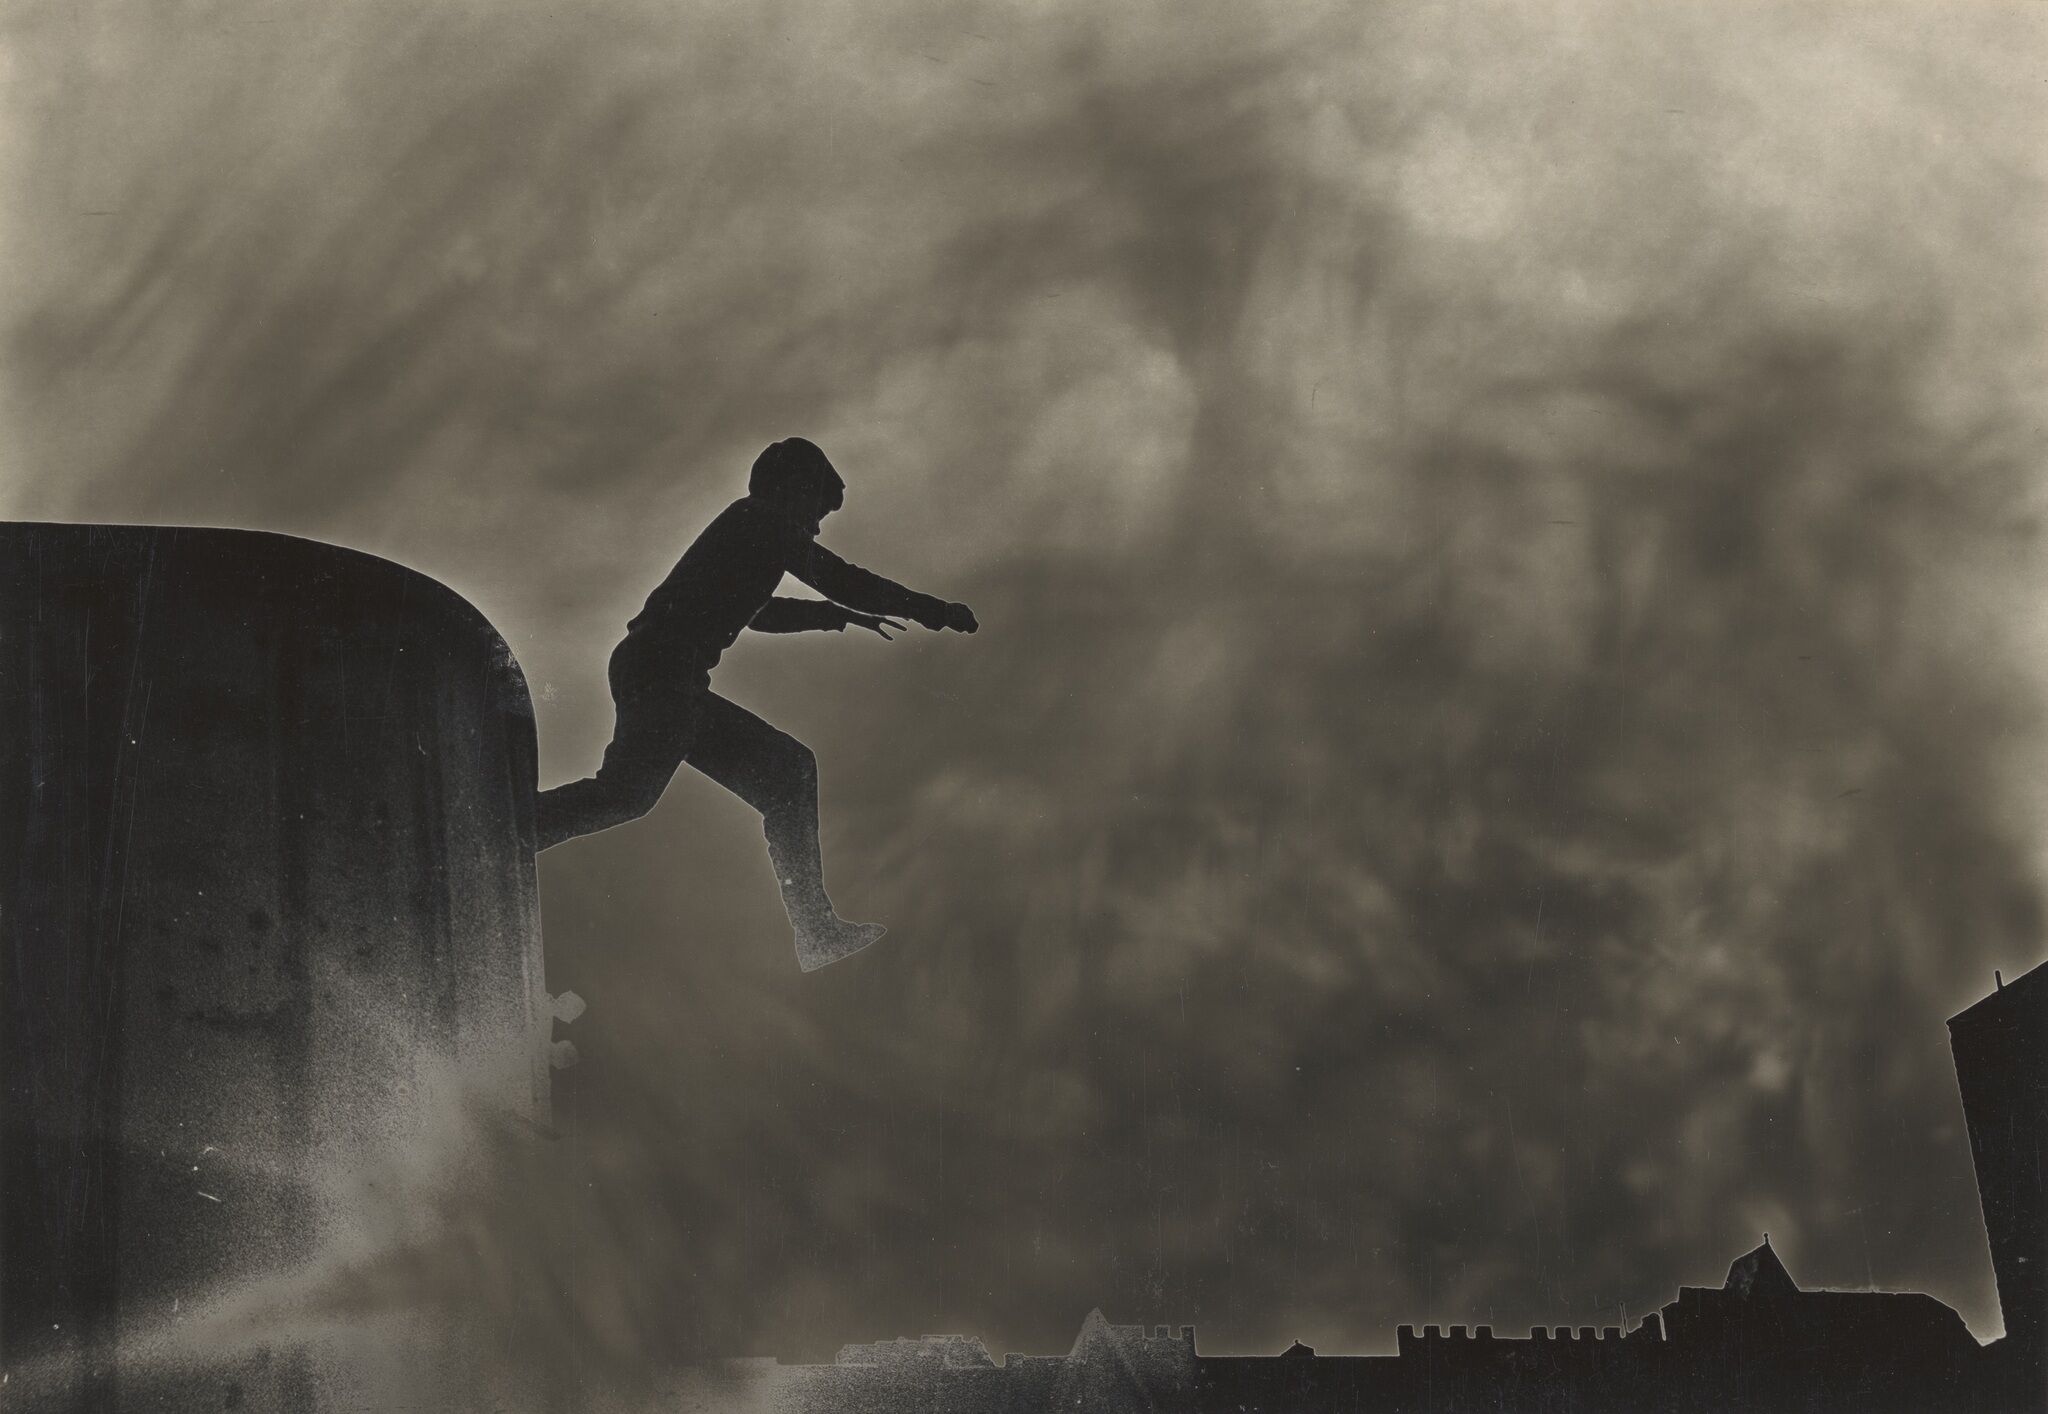 A silhouette of a person jumping down from a building with a silhouette of other buildings in the background.